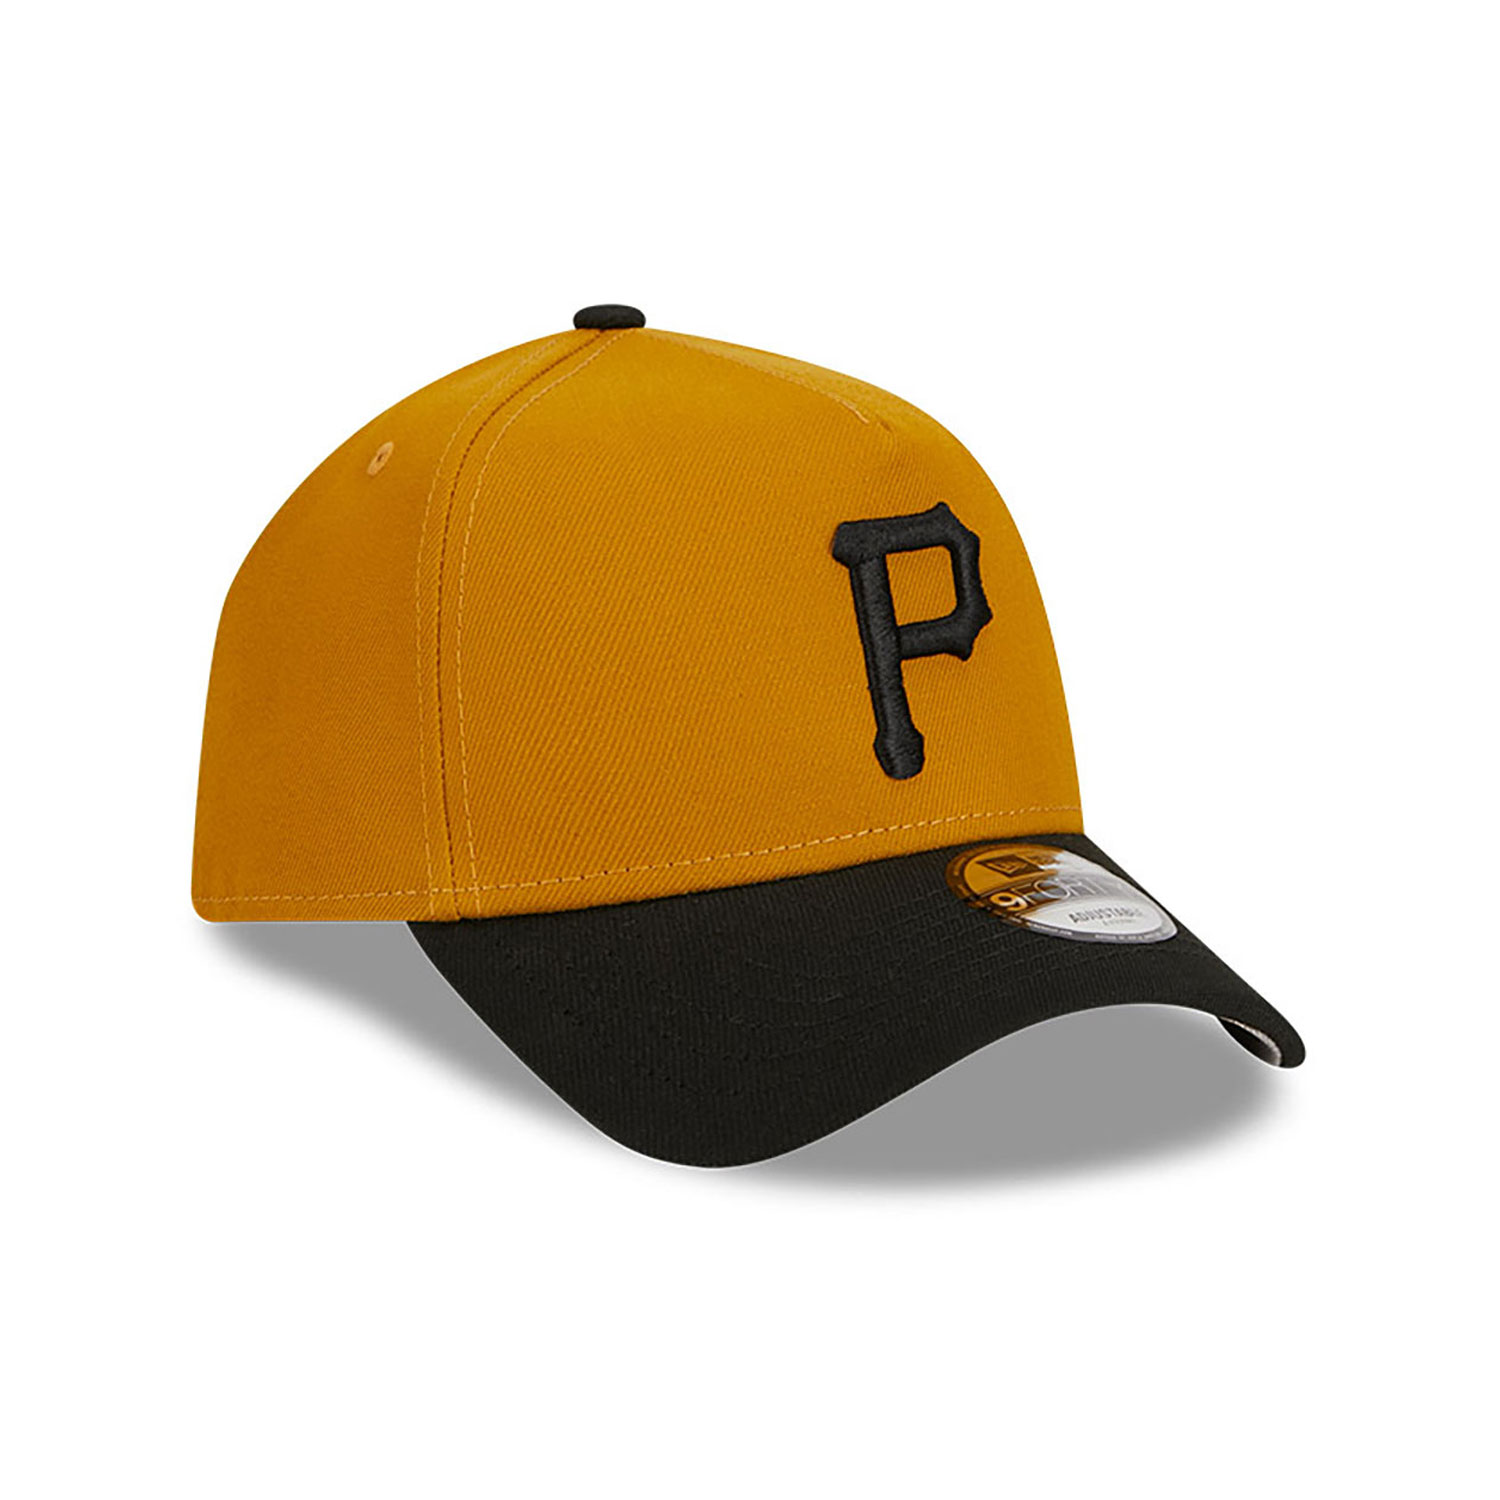 Pittsburgh Pirates Rustic Fall Gold A-Frame 9FORTY Adjustable Cap